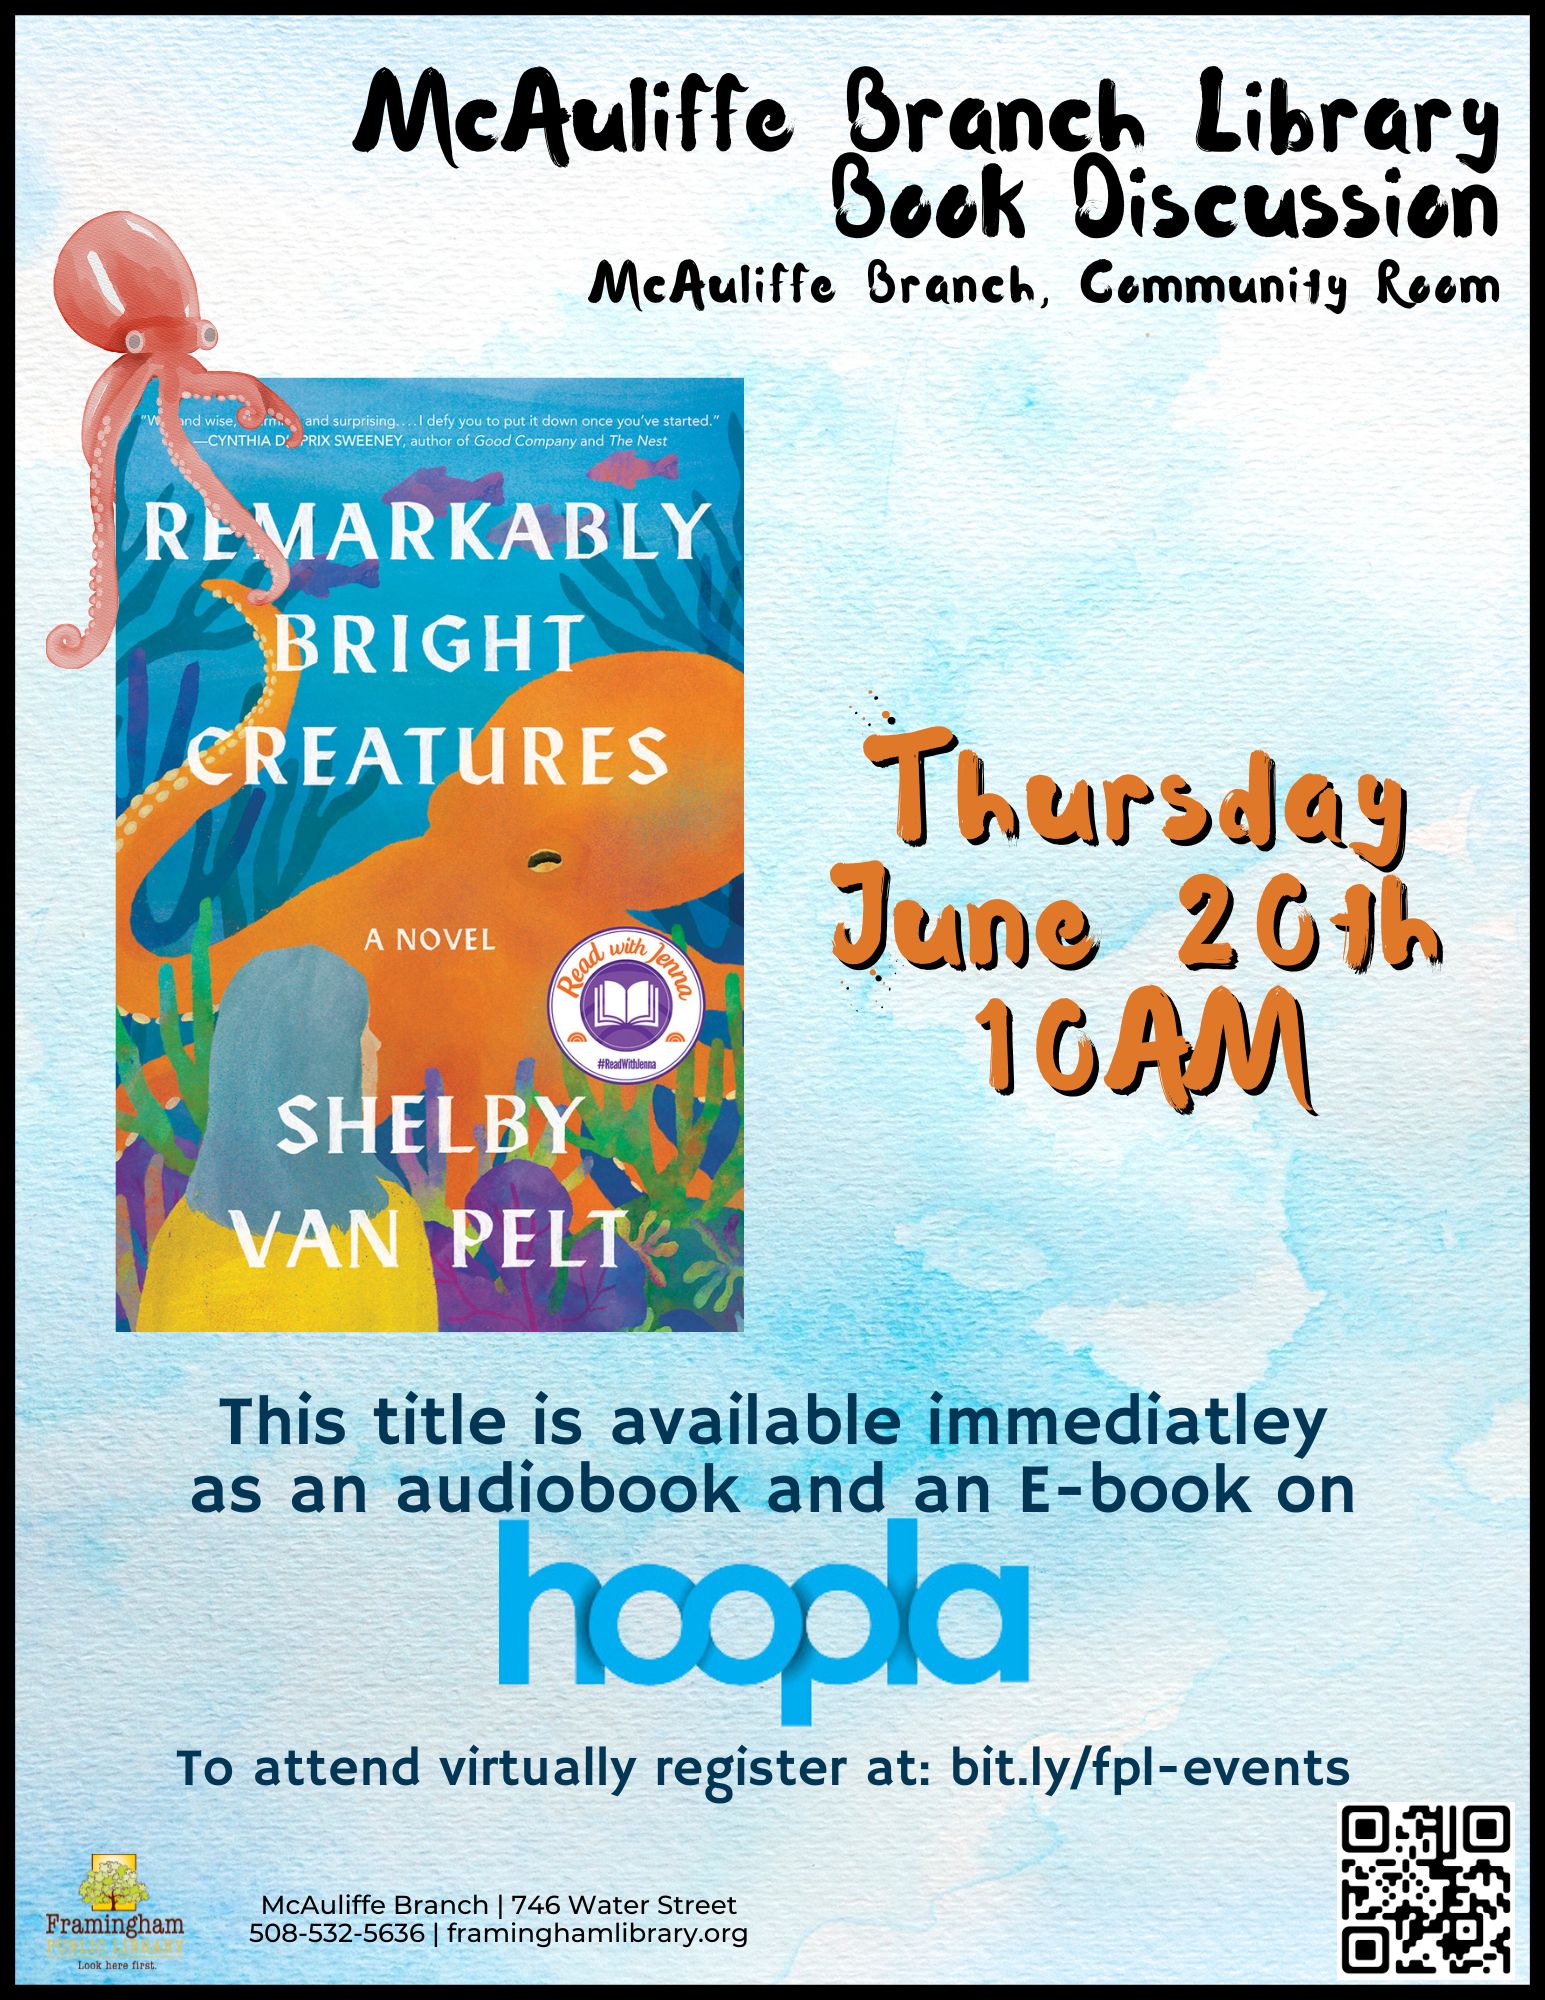 McAuliffe Morning Book Club: Remarkably Bright Creatures by Shelby Van Pelt thumbnail Photo